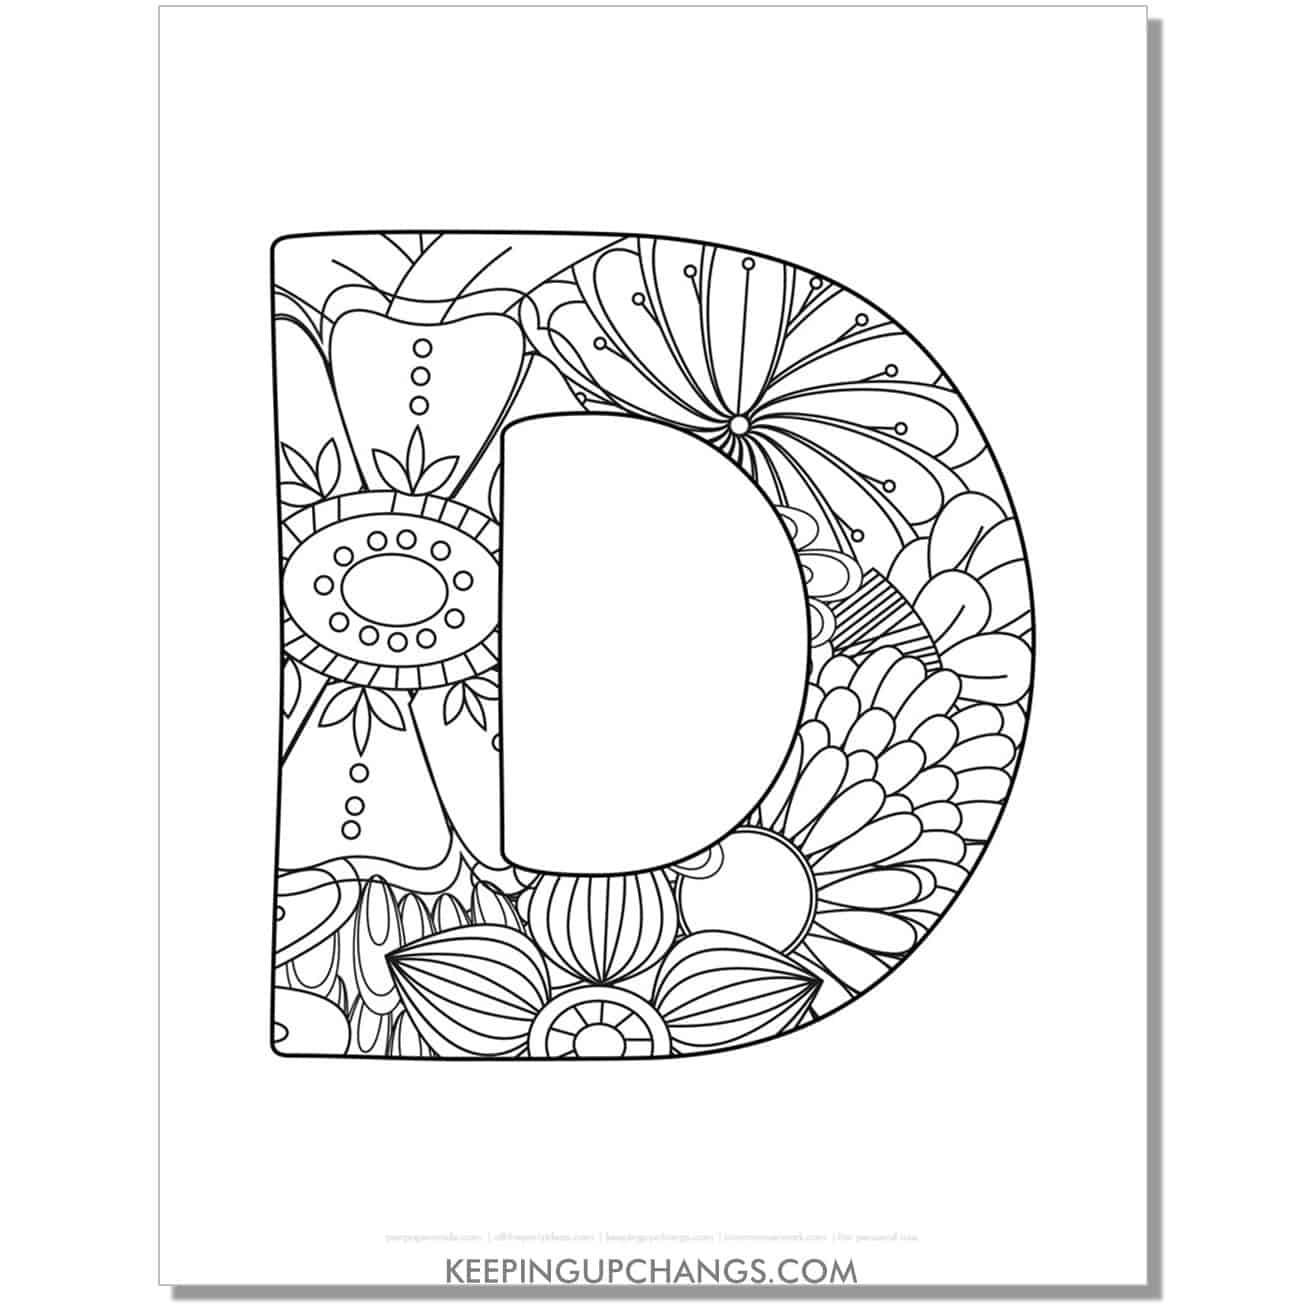 free letter d to color, complex mandala zentangle for adults.